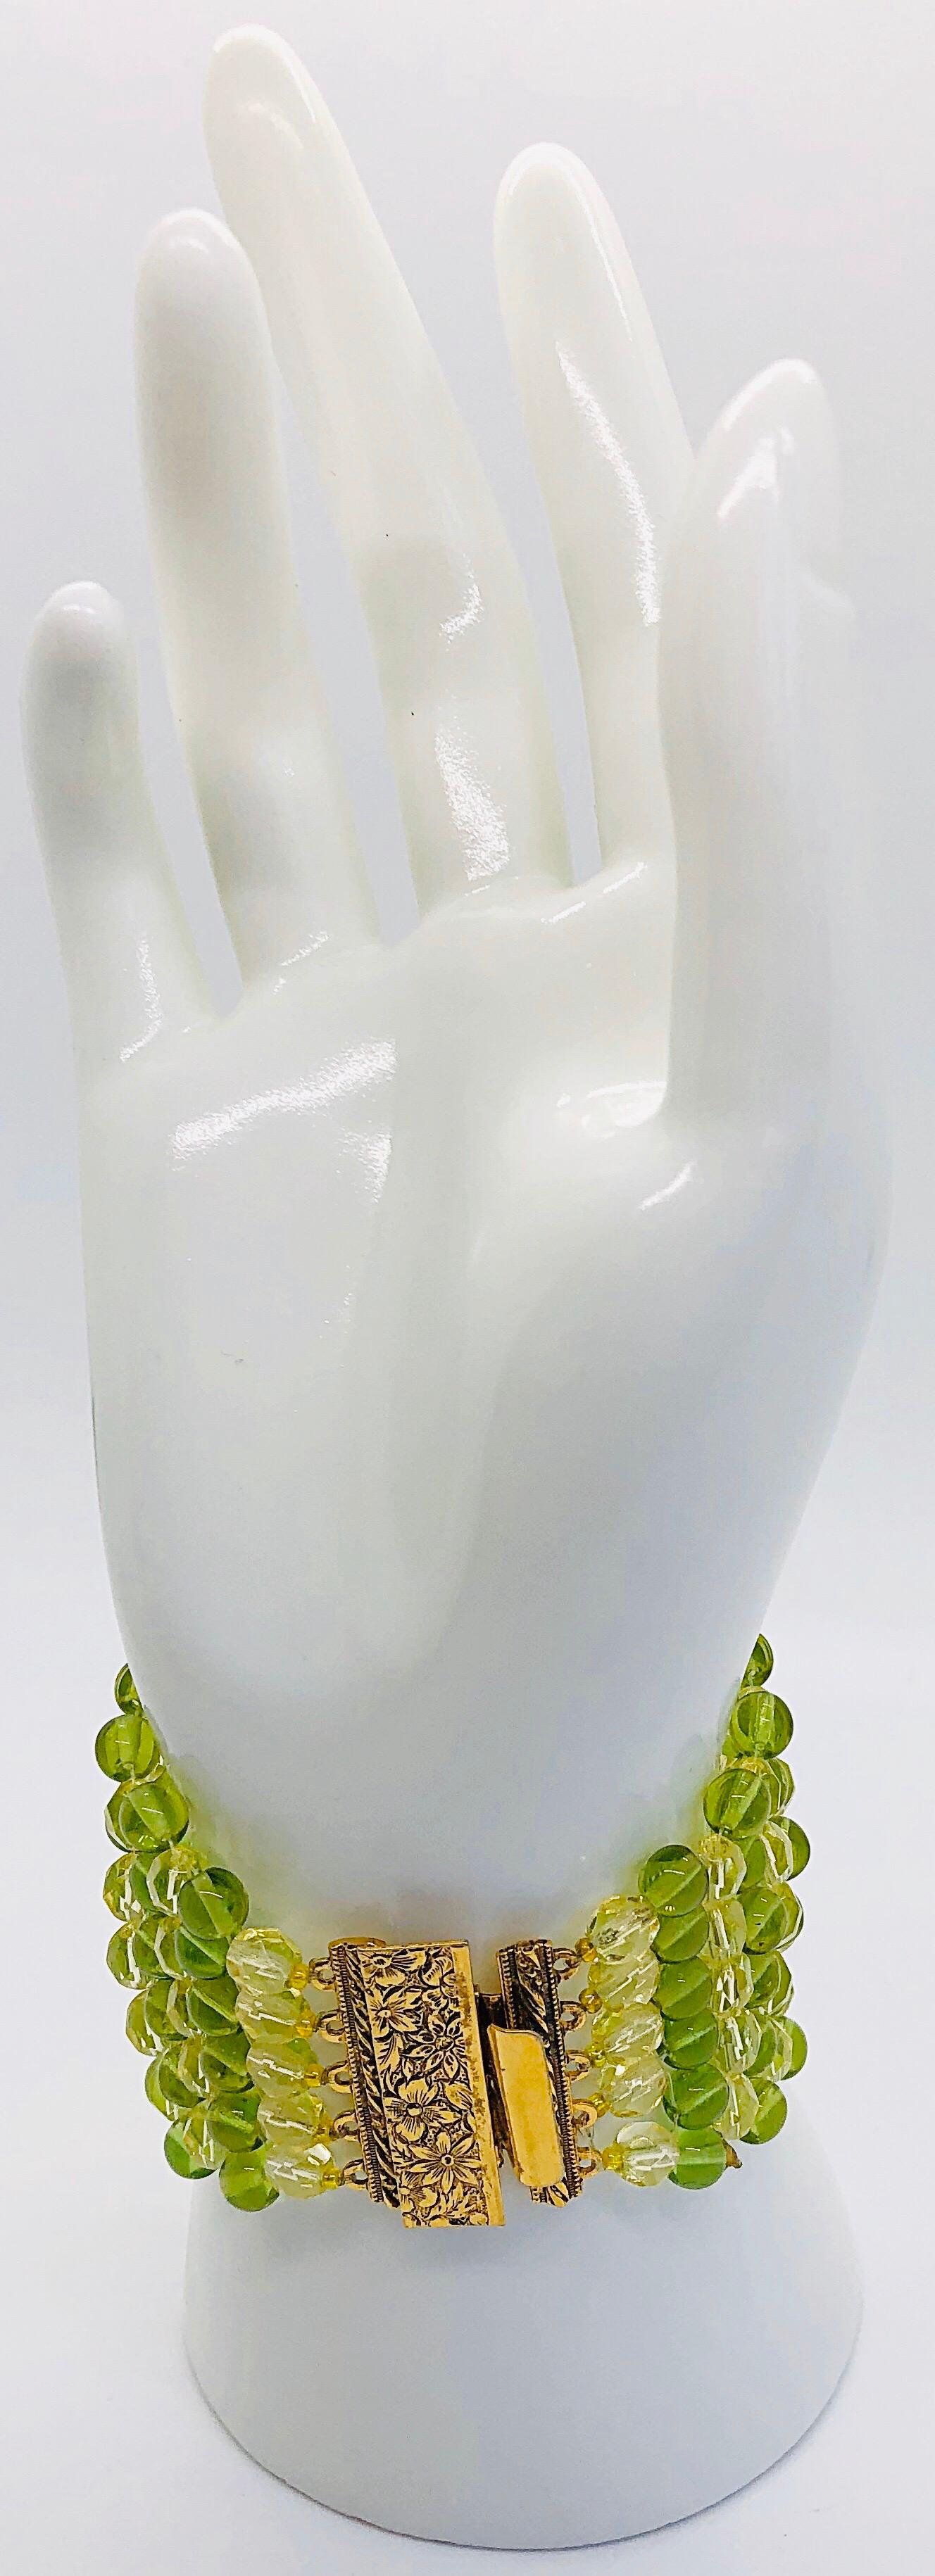 Chic 1960s Neon Lime Green + Hot Pink Lucite Vintage 60s Flower Bracelet Cuff 2